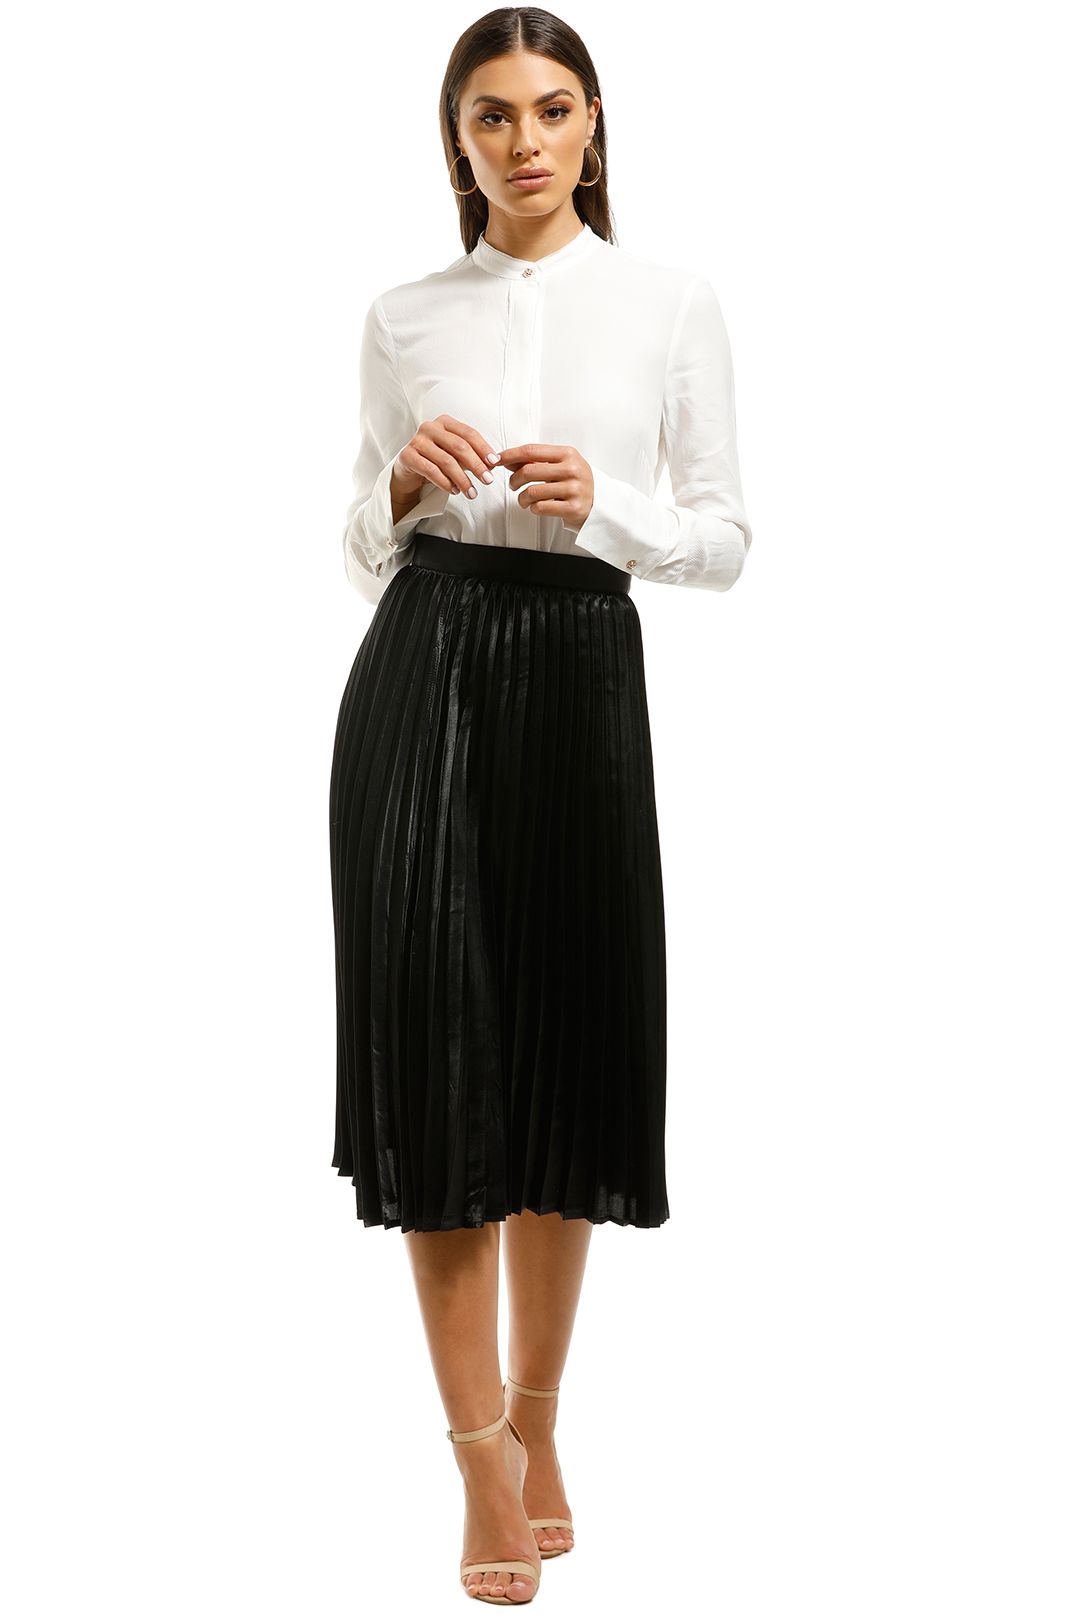 Charlie-Holiday-Juniper-Pleated-Skirt-Front